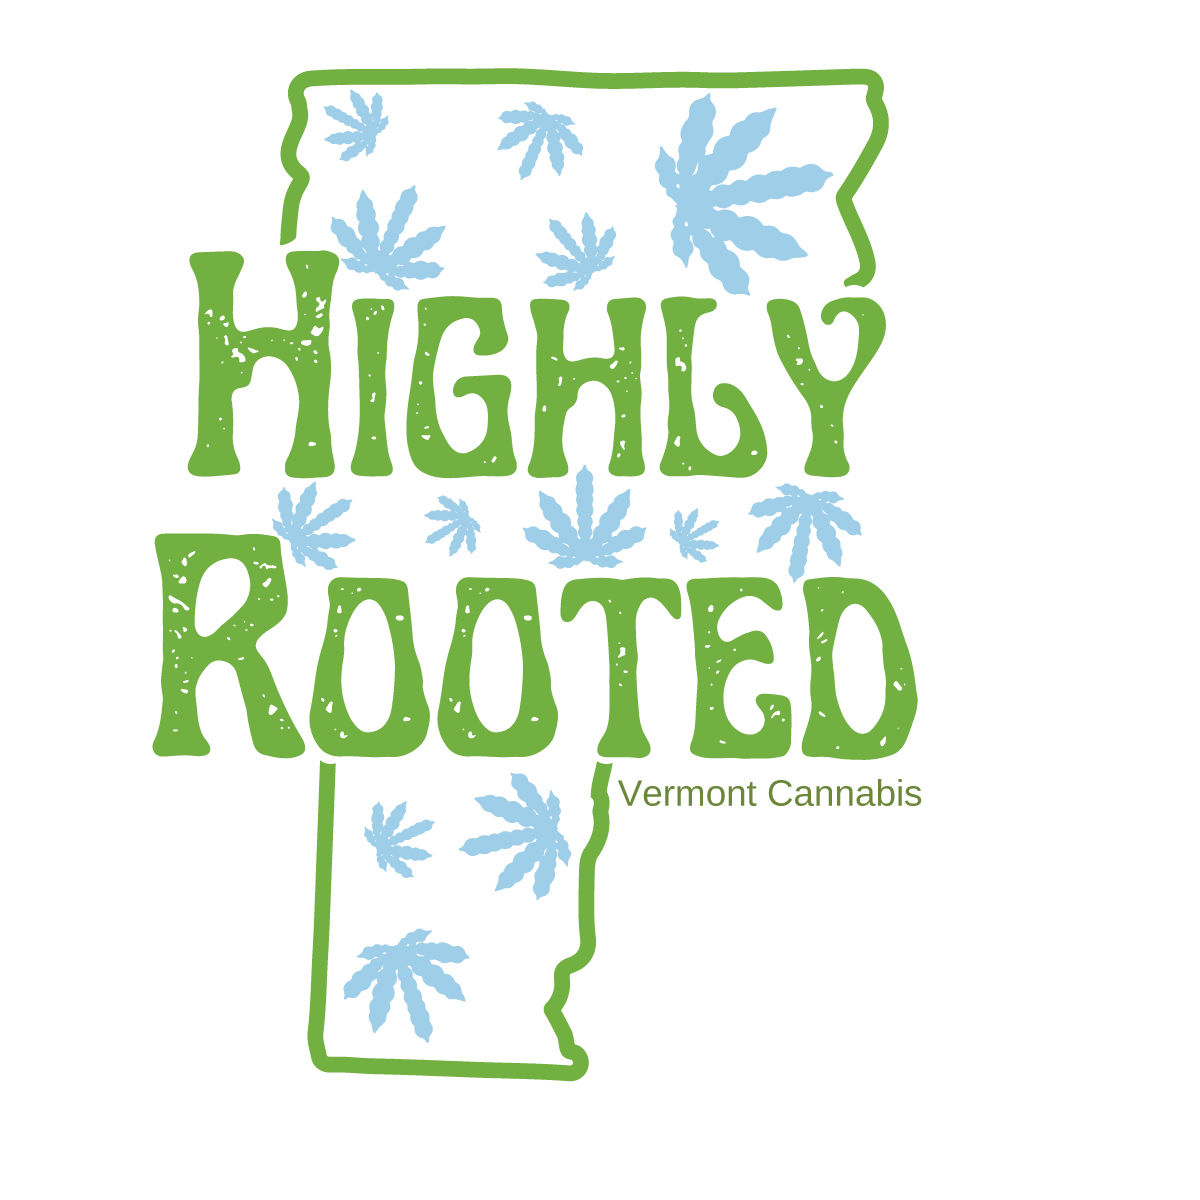 Highly Rooted